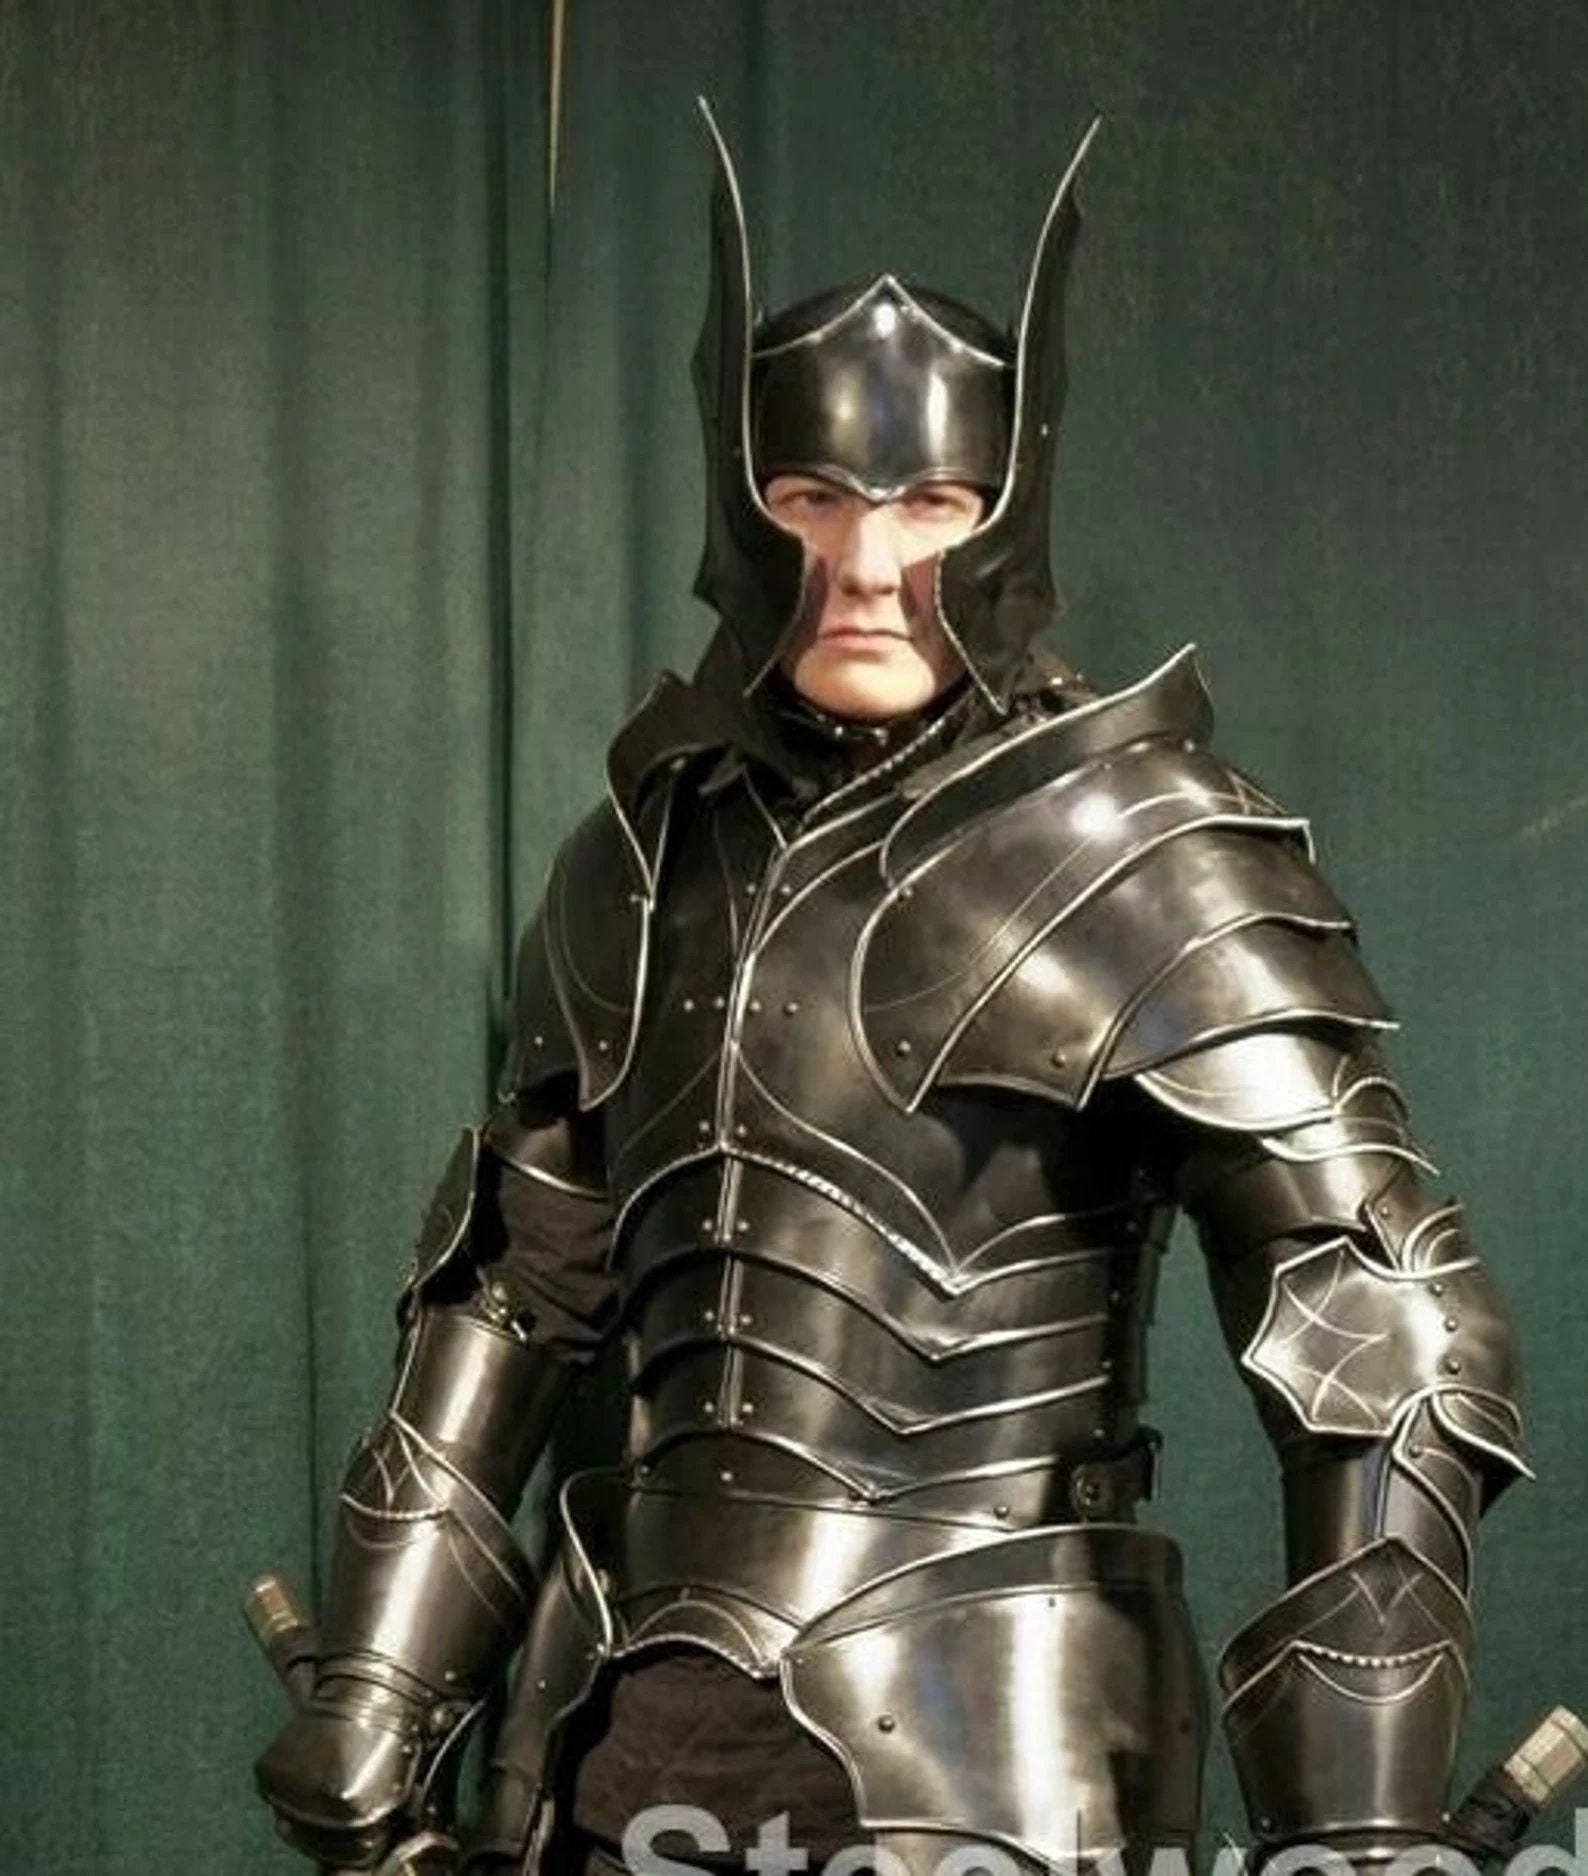 Medieval LOTR Elven Full Suit of Armor Knight Rohan Armor - Etsy New Zealand